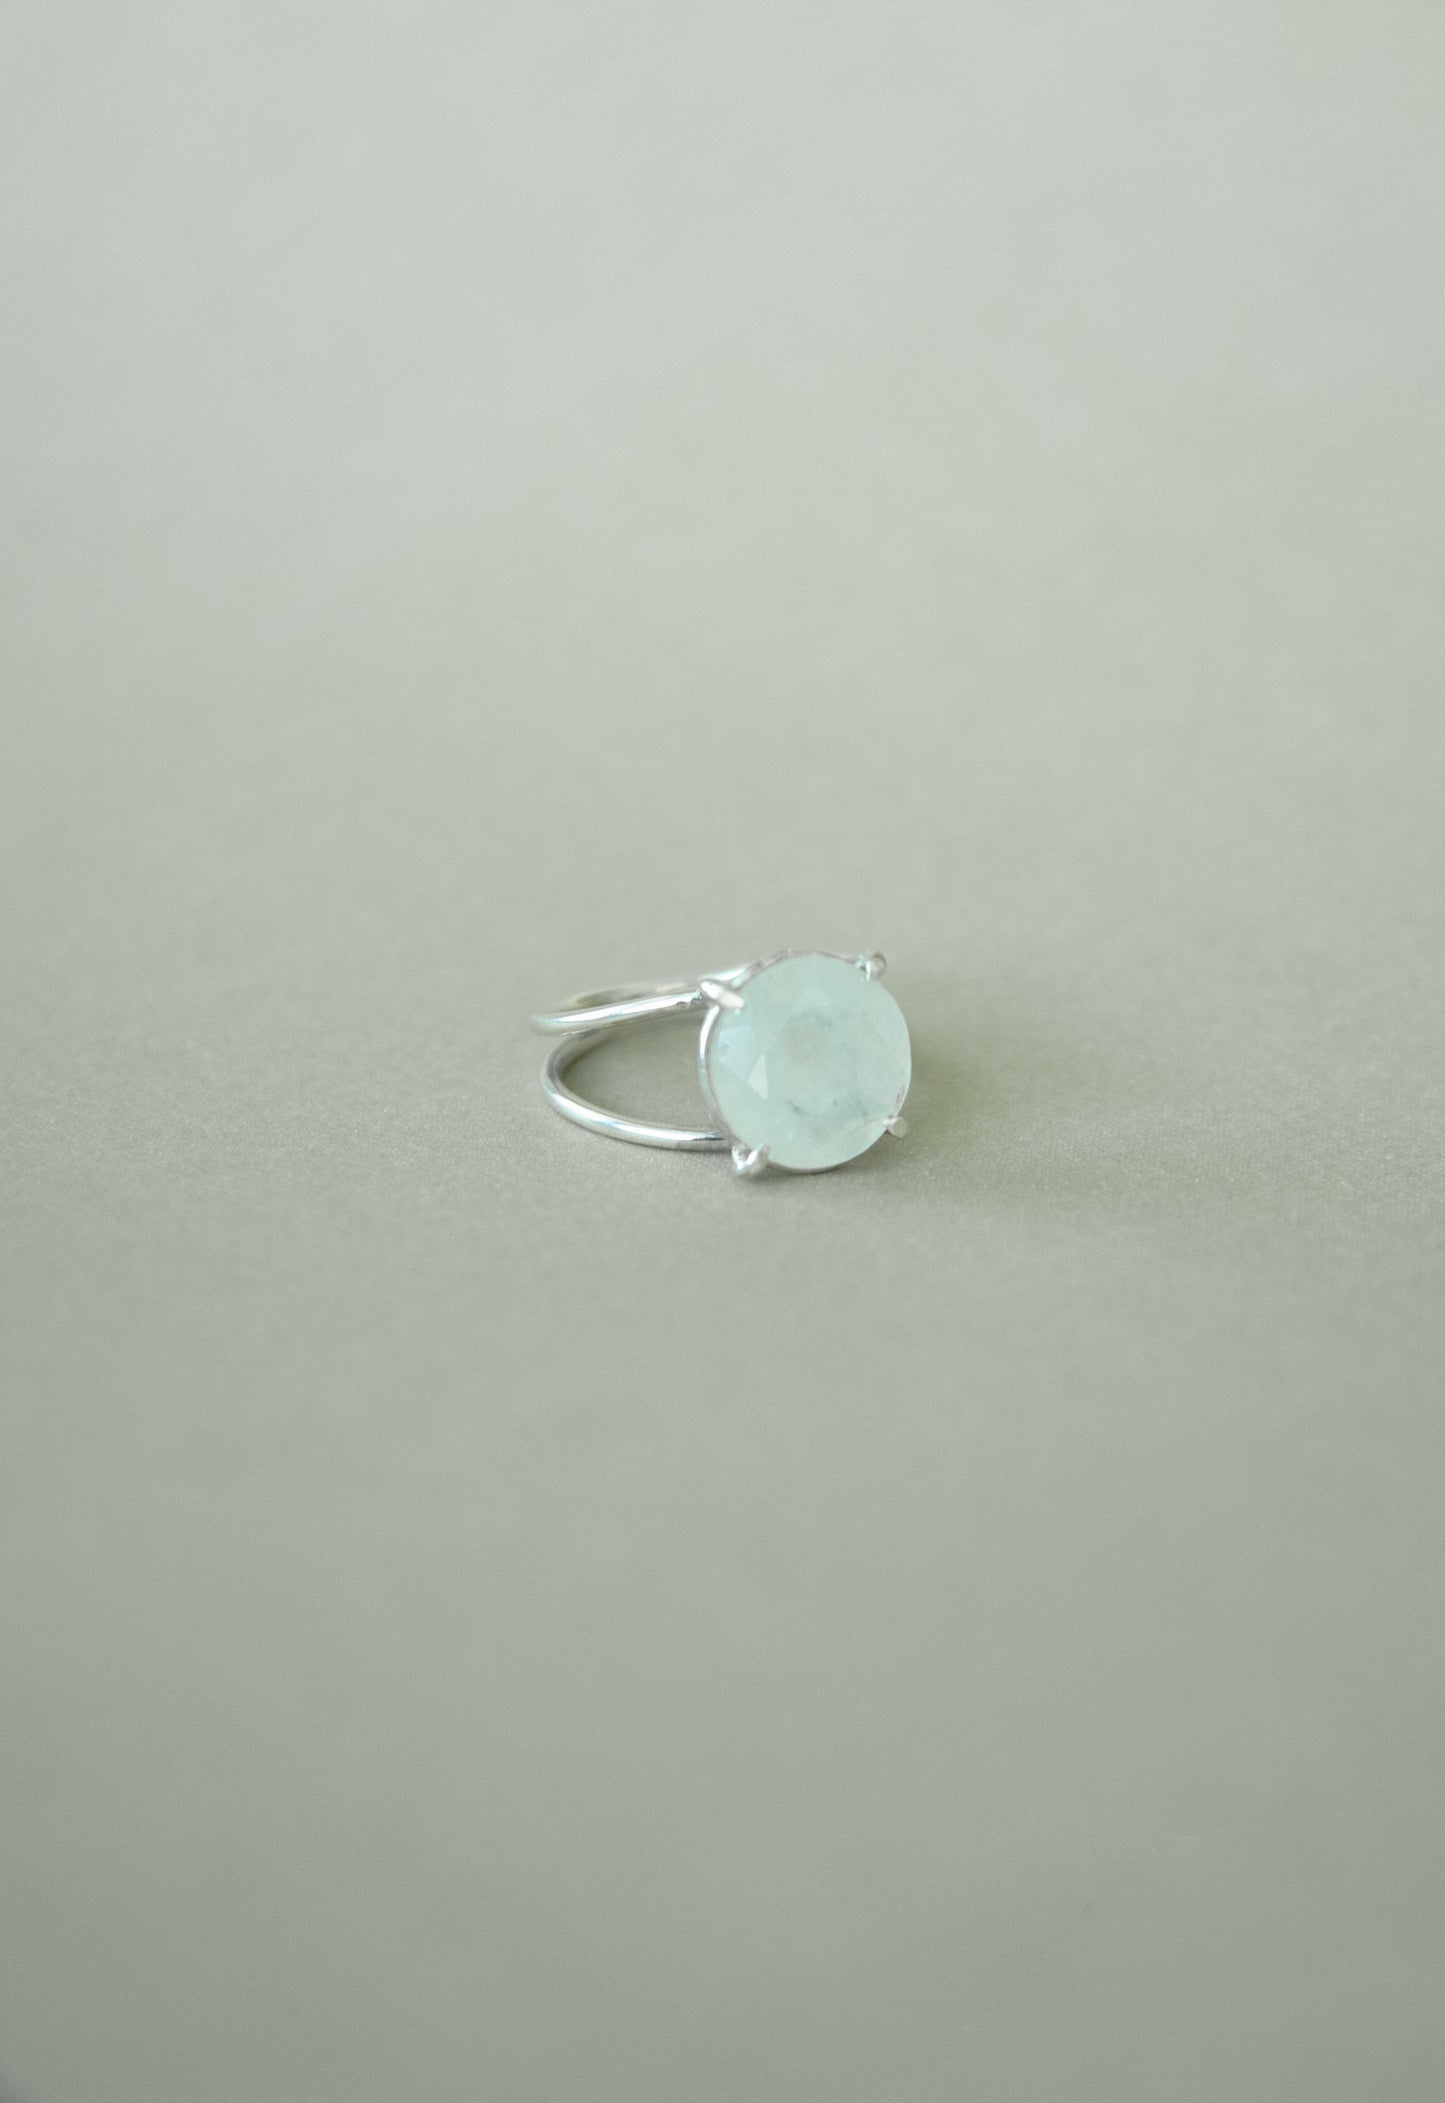 Moonstone and sterling silver .925